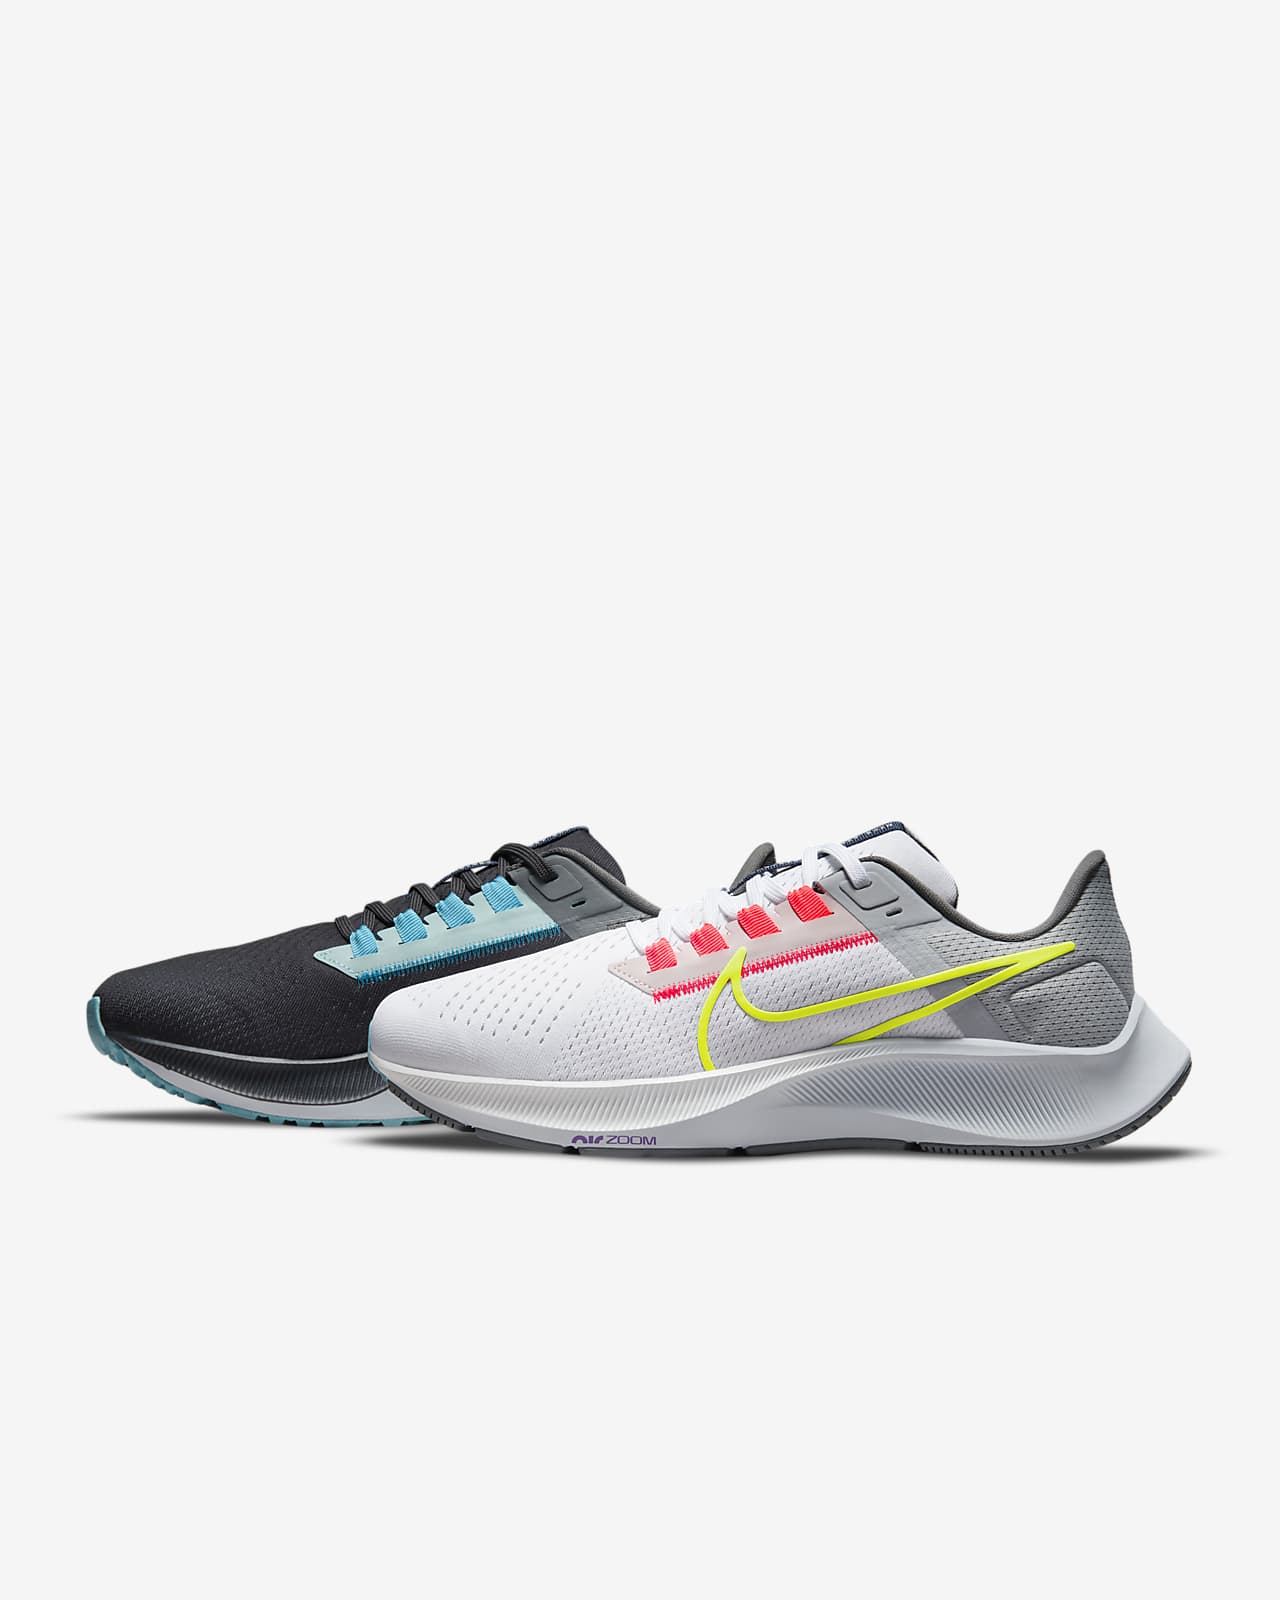 Chaussure de running Nike Air Zoom Pegasus 38 Limited Edition pour ...